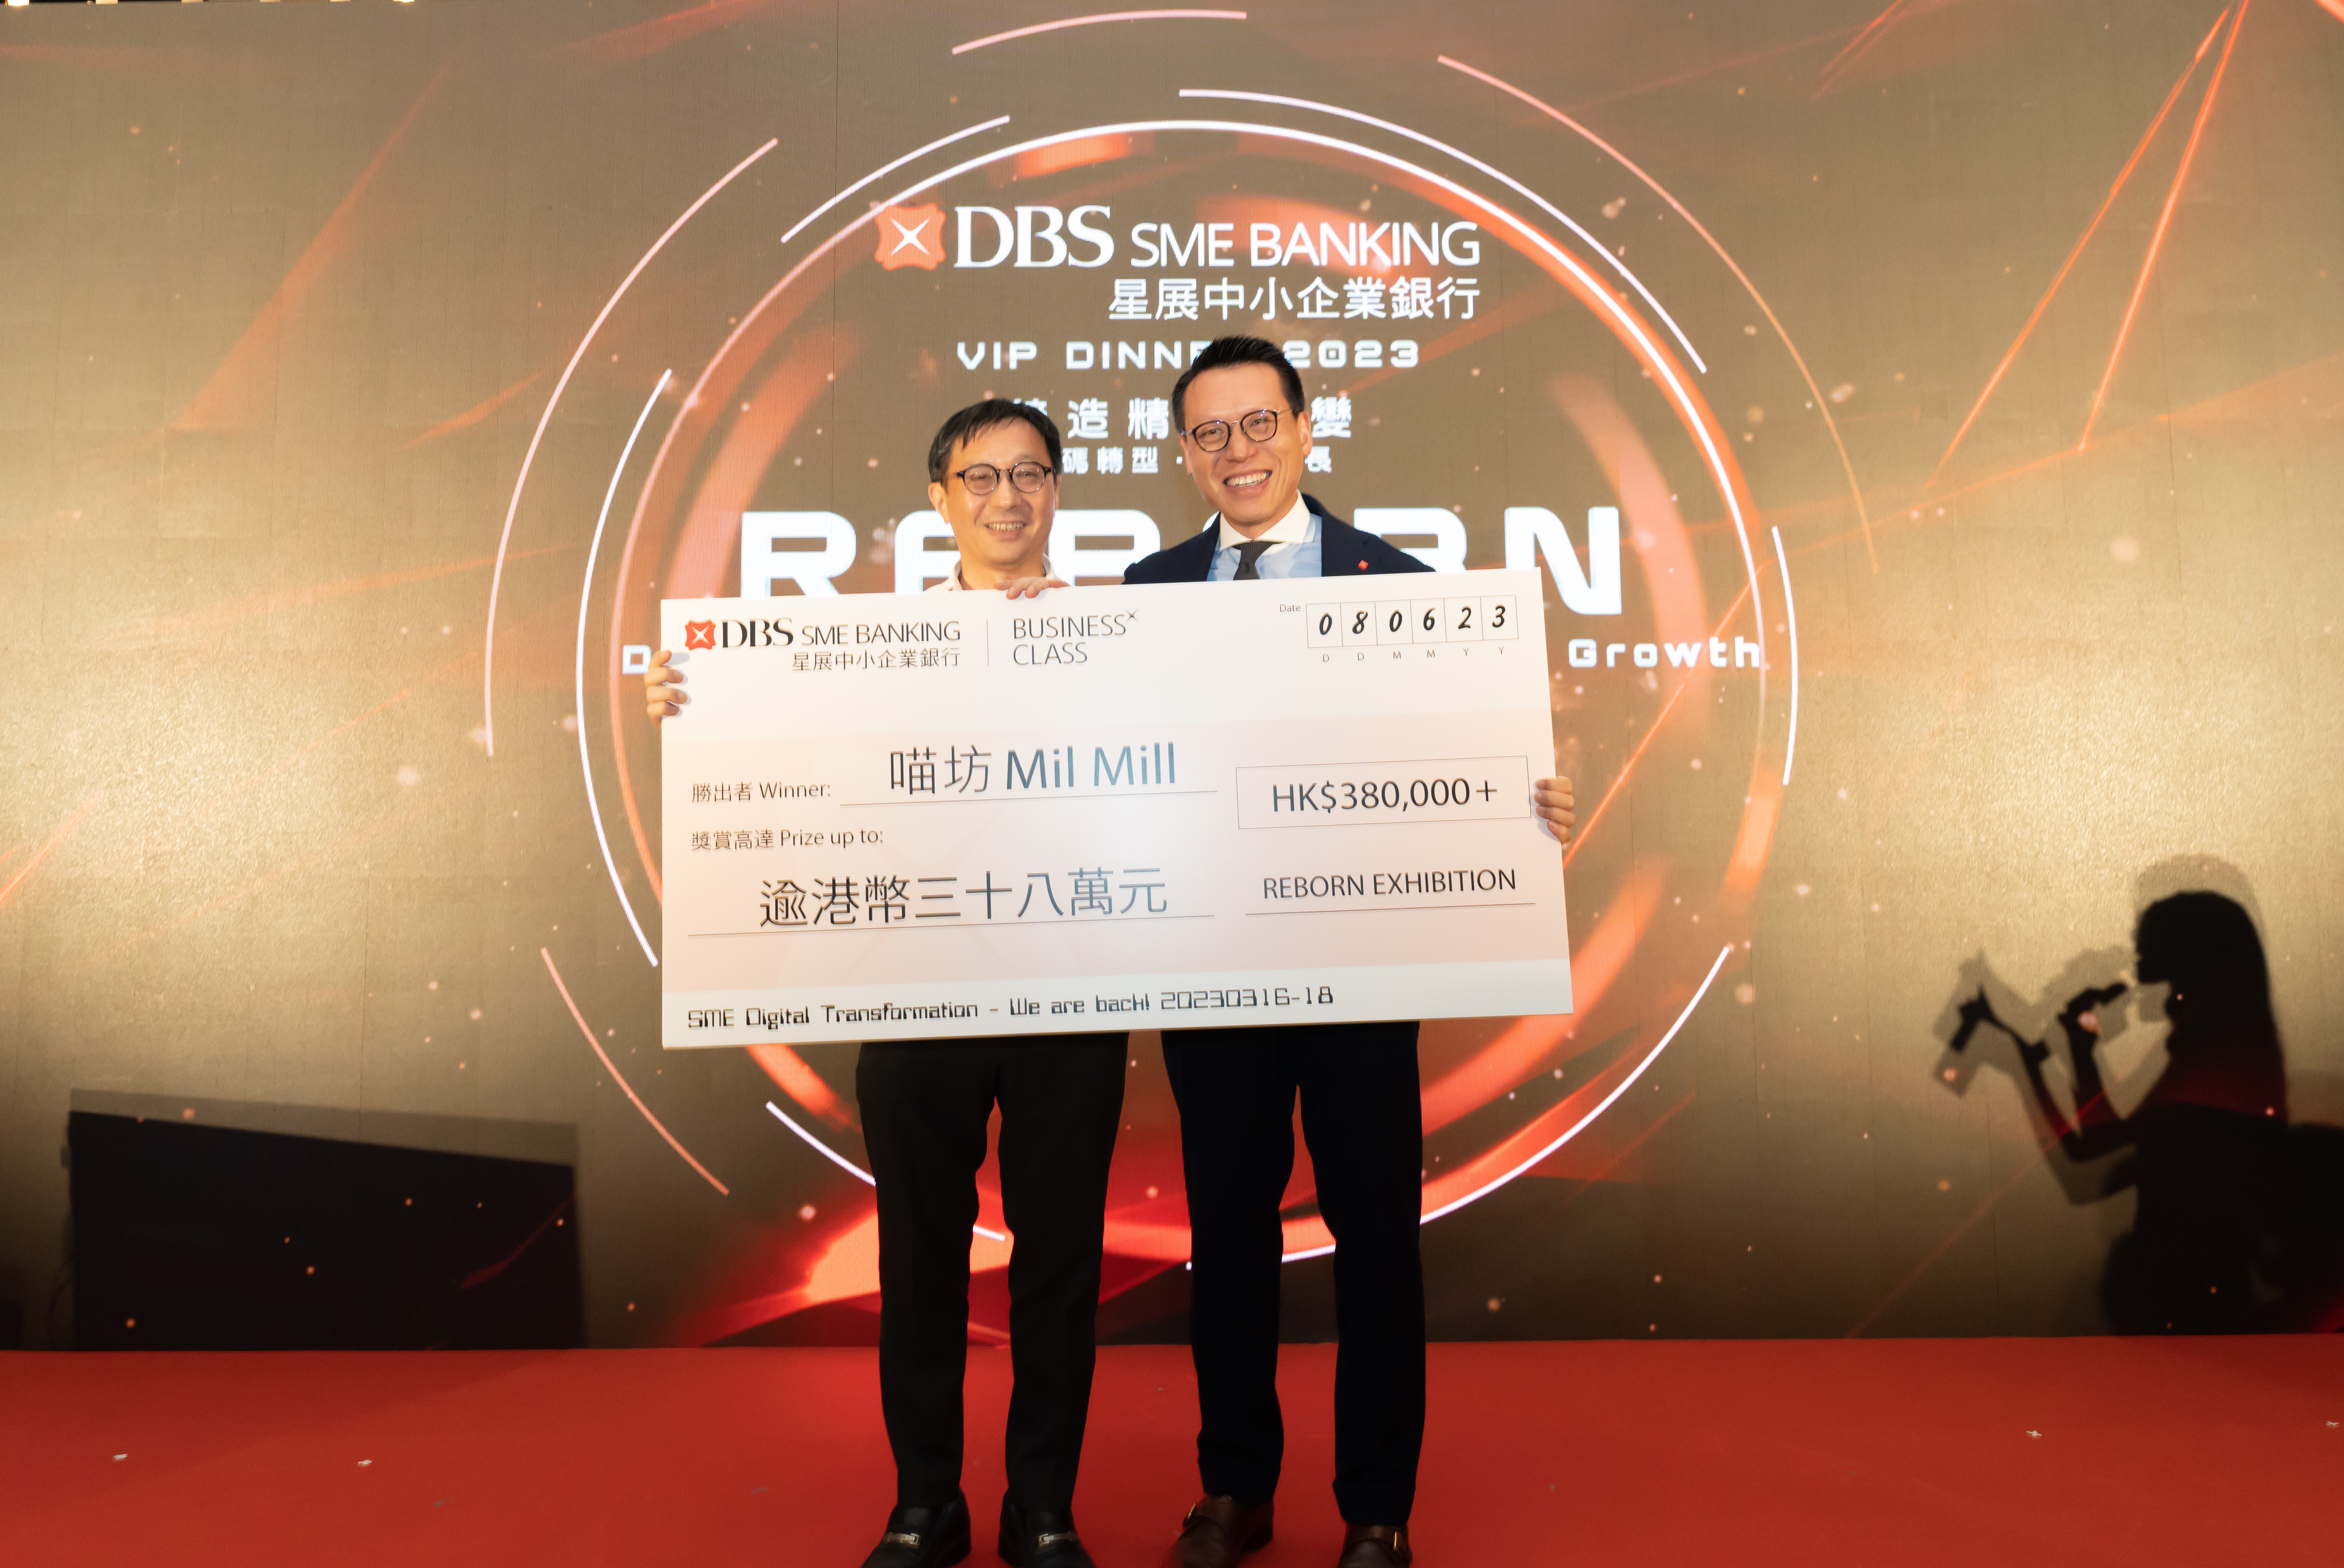 Mil Mill is voted by the public as the top SME from the DBS BusinessClass Reborn Exhibition – We are Back: Digital Transformation of SMEs digital art exhibition held in March and is entitled to a total prize of over HKD $380,000 from DBS Hong Kong.